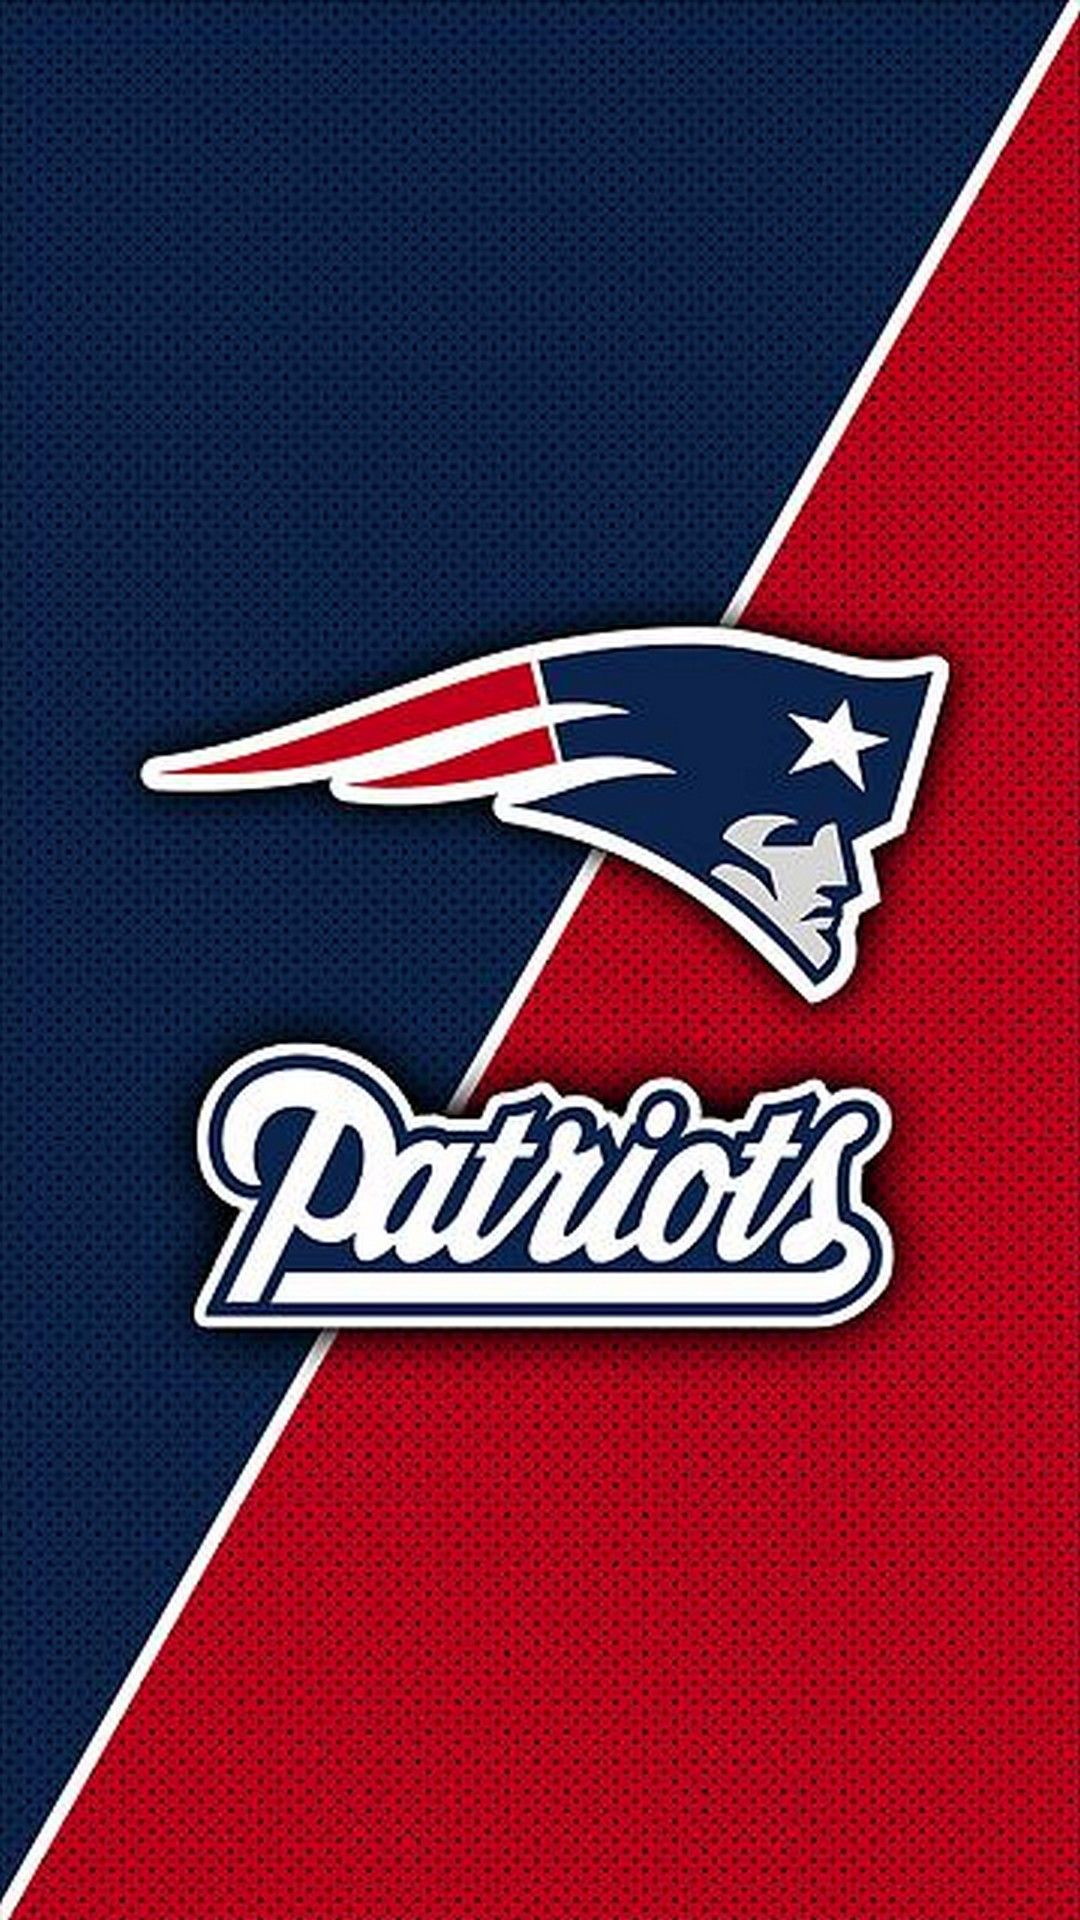 NE Patriots Android Wallpaper with high-resolution 1080x1920 pixel. You can use and set as wallpaper for Notebook Screensavers, Mac Wallpapers, Mobile Home Screen, iPhone or Android Phones Lock Screen